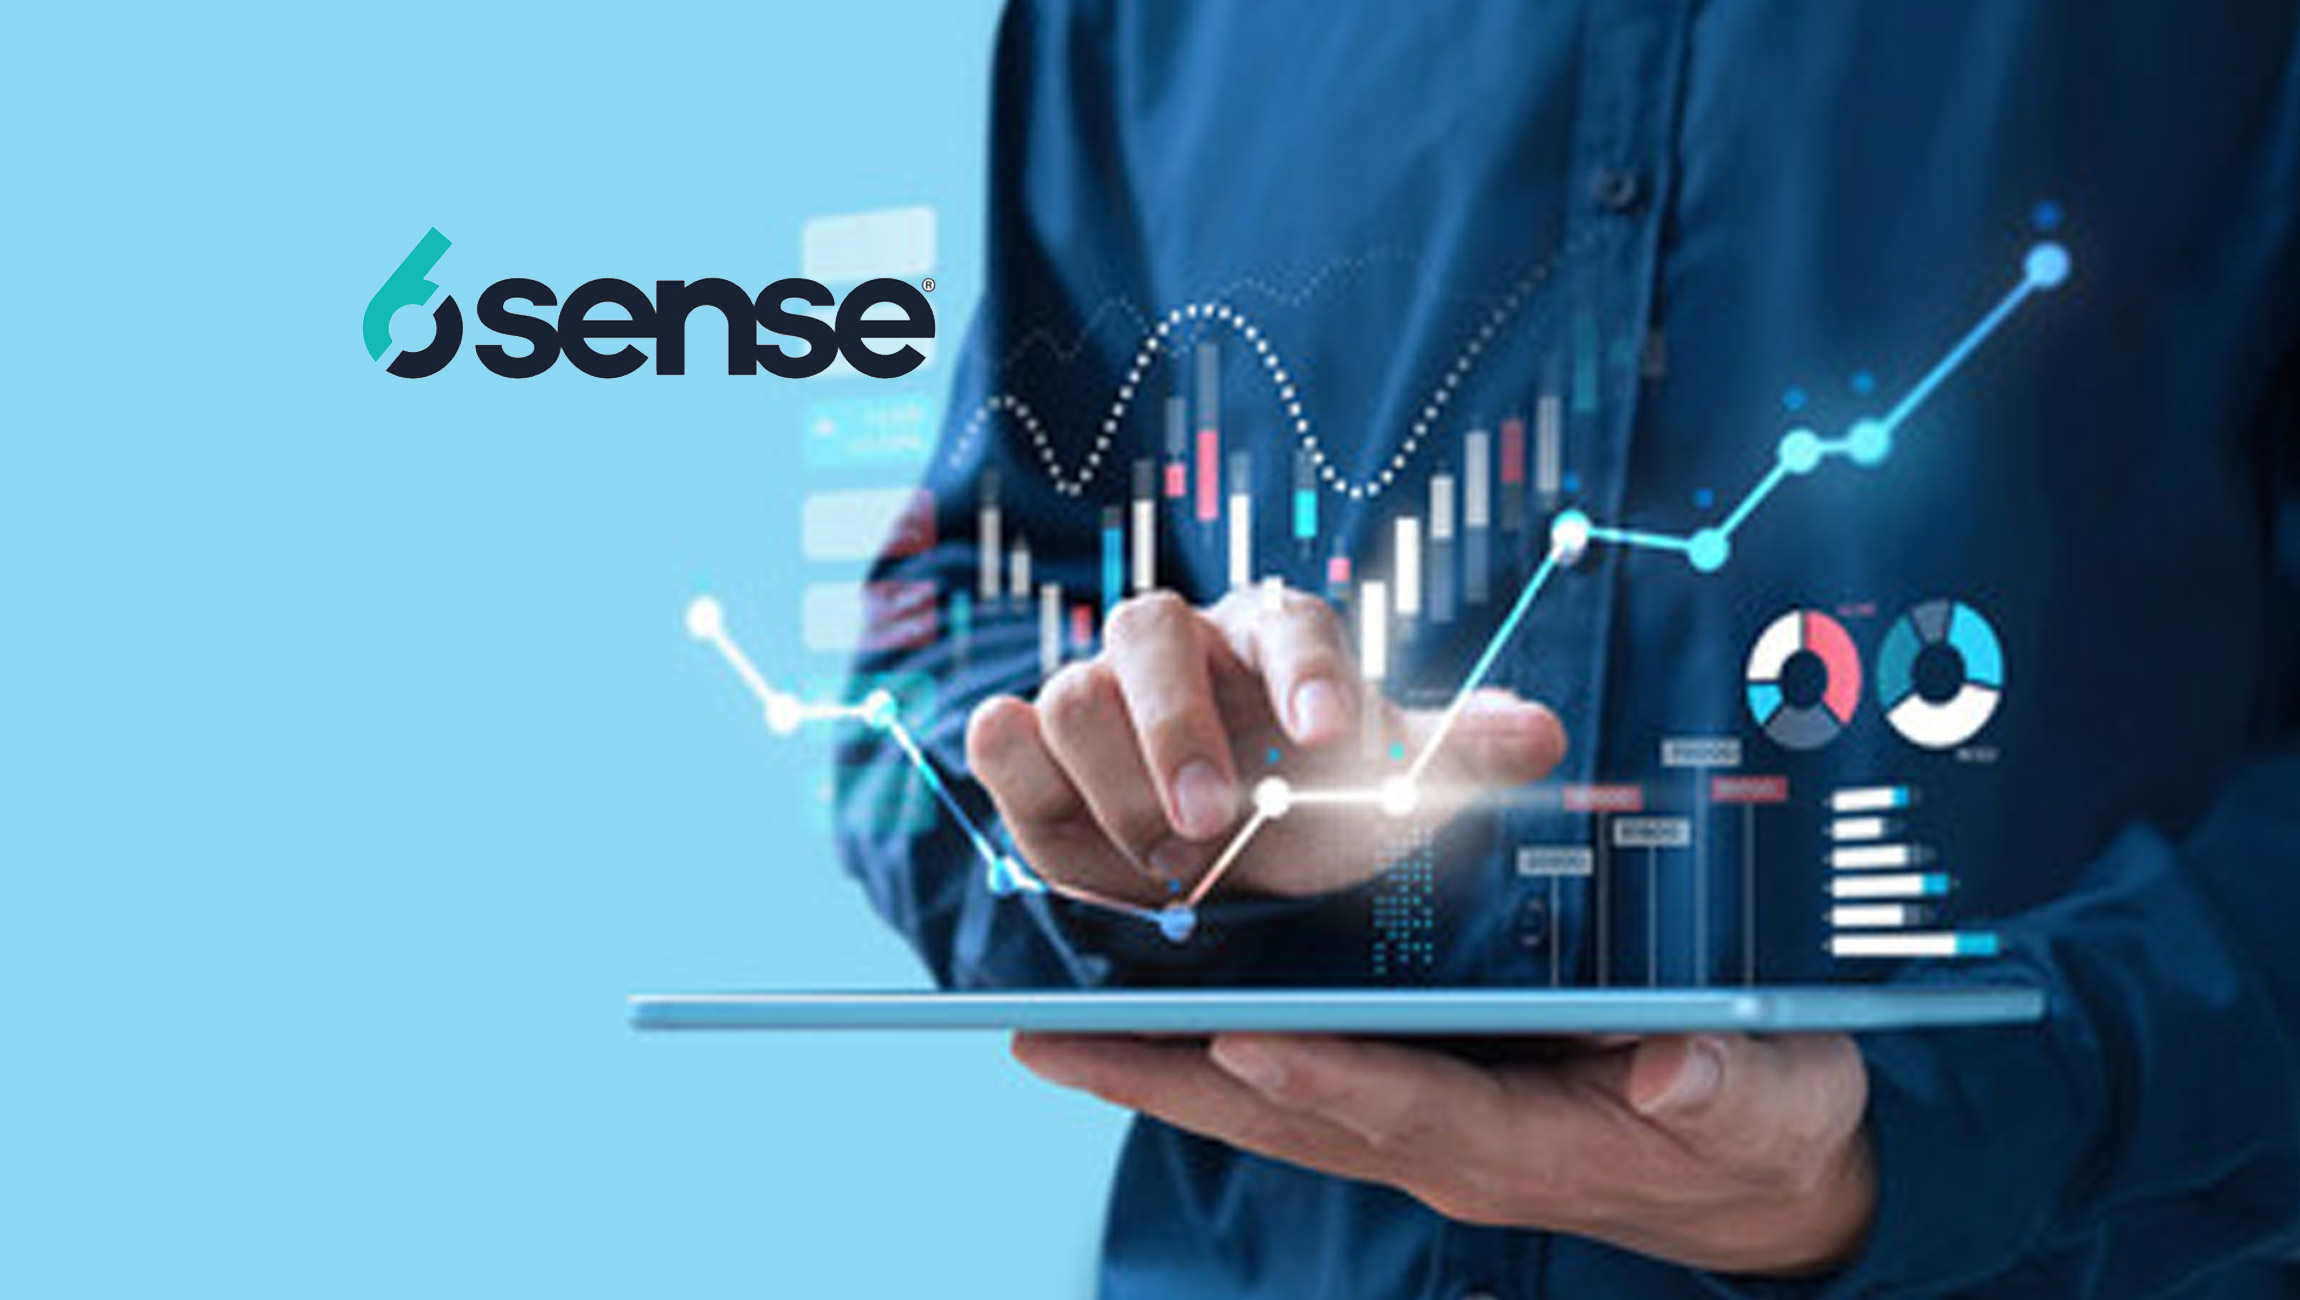 6sense Recognized for Sales and Marketing Leadership in Fall G2 Grid Reports